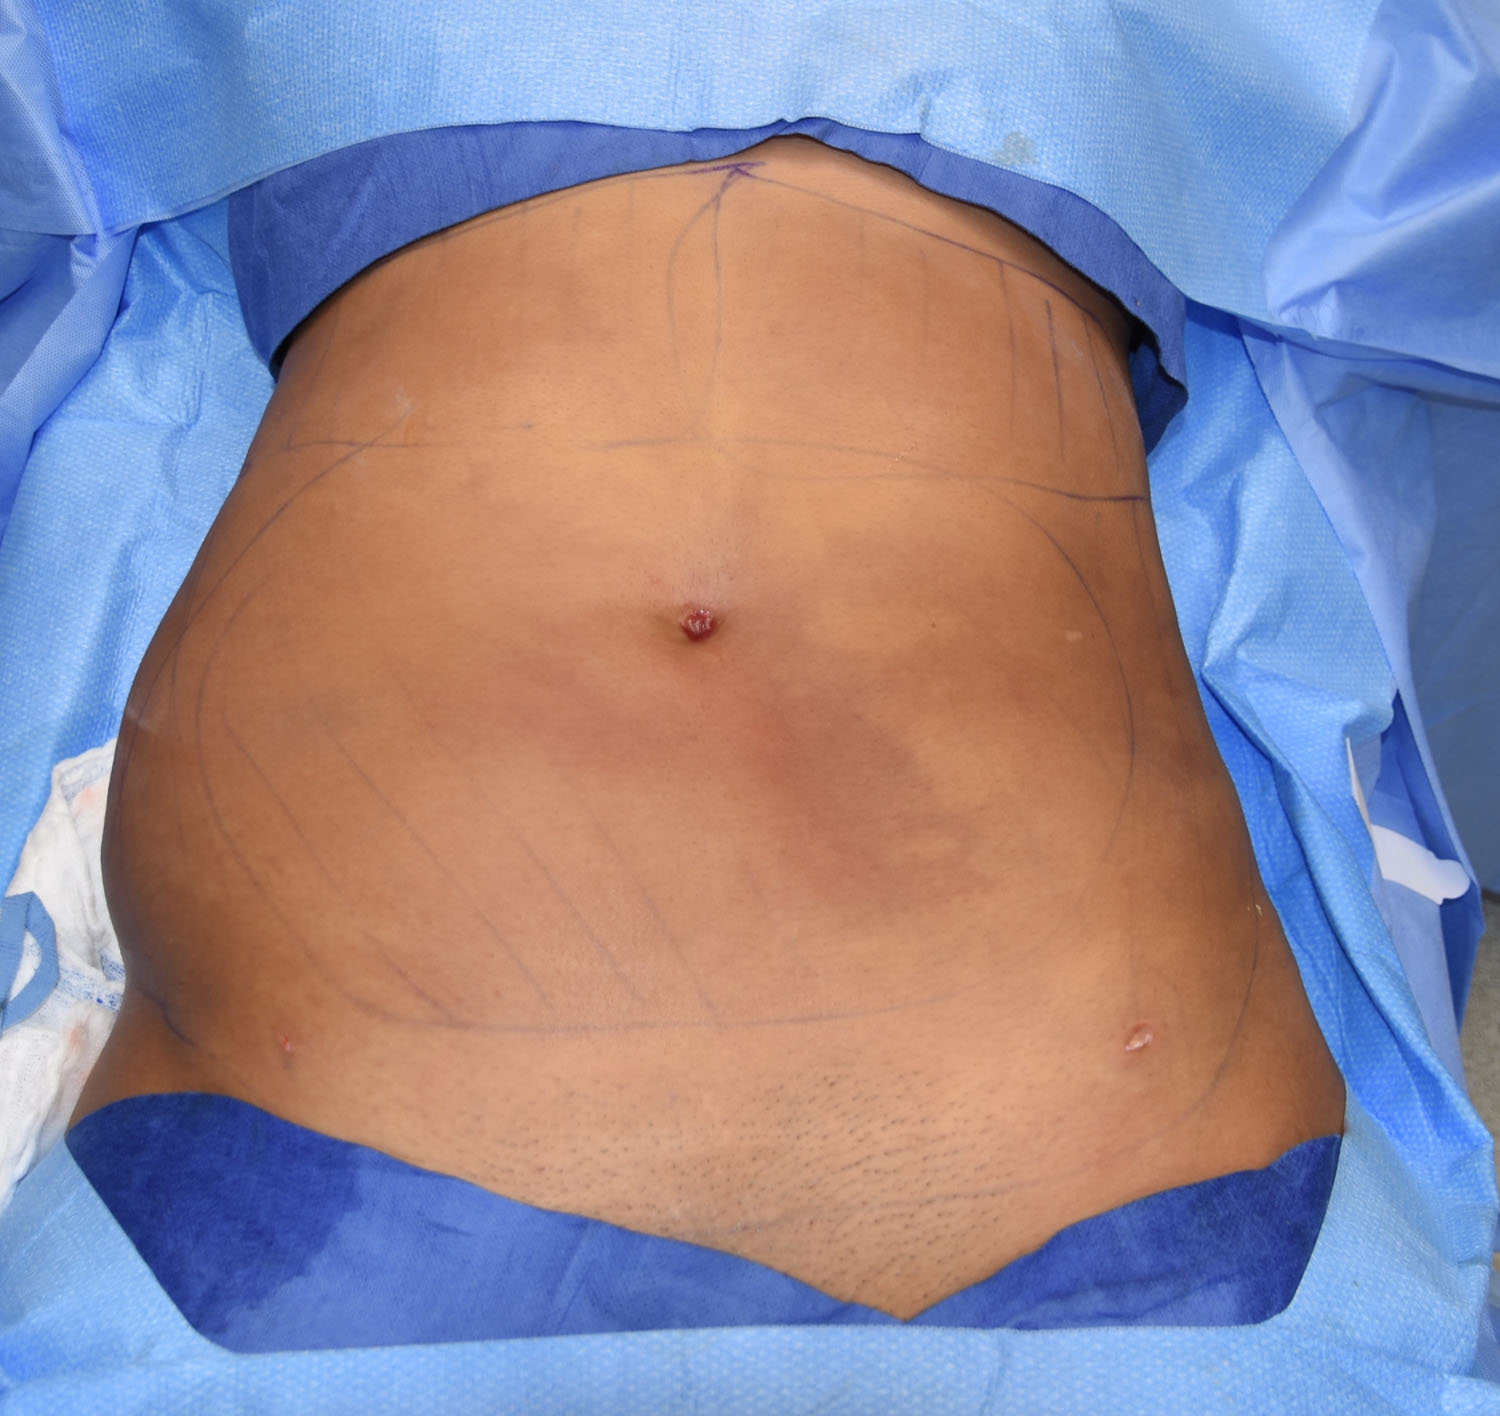 OR Snapshots - Abdominal and Flank Liposuction - Explore Plastic